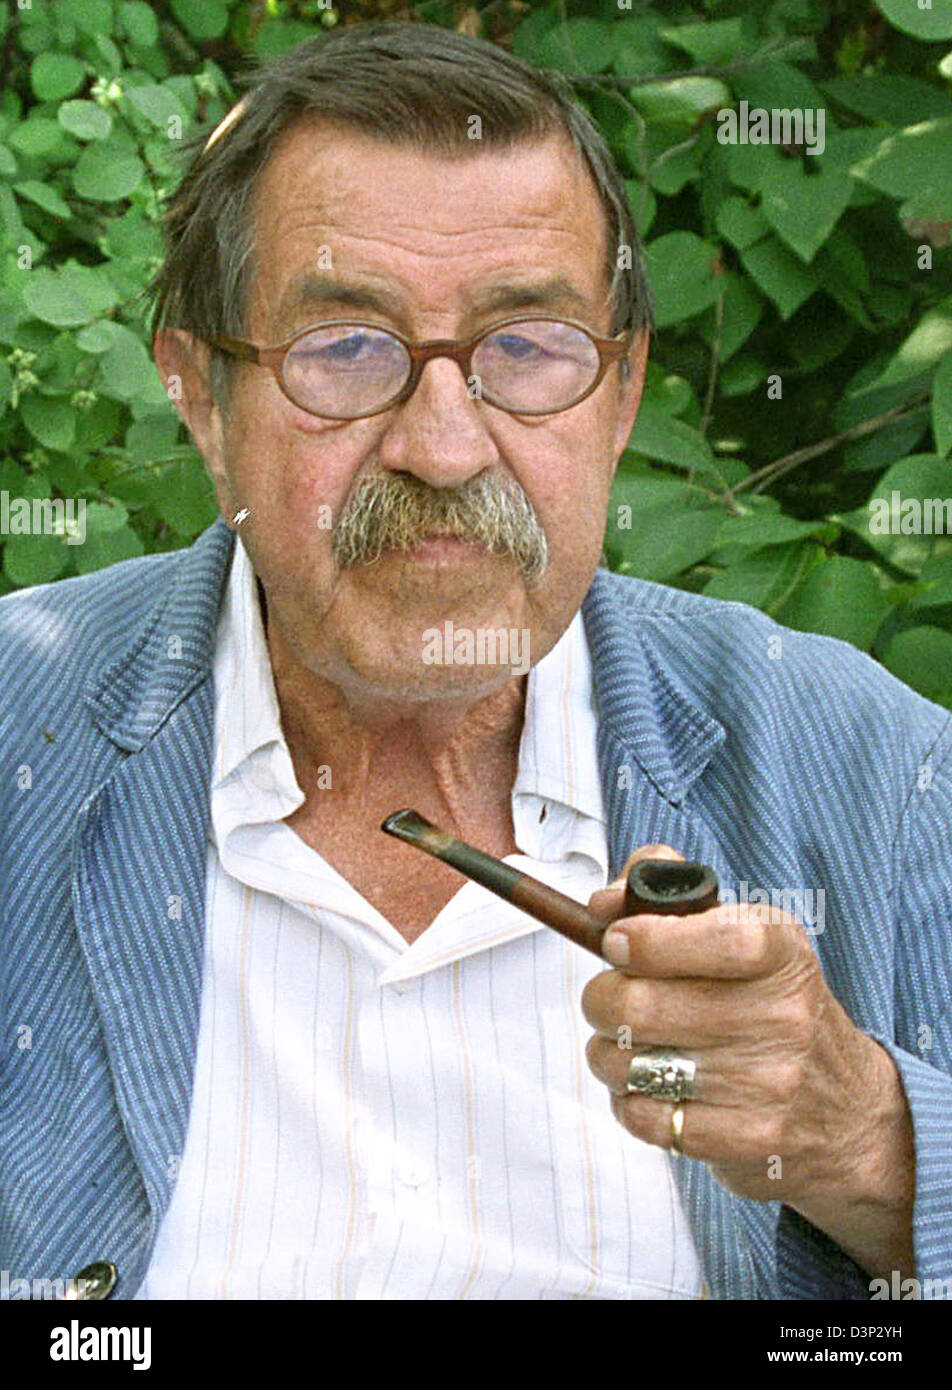 (FILE) - German author and Nobel literature laureate Guenter Grass pictured in his holiday domicile on the island Moehn, Denmark, 5 August 2006. The confession of the 78-year-old having formed part of the Waffen SS during World War II caused a controversy. Photo: Matthias Hoenig Stock Photo